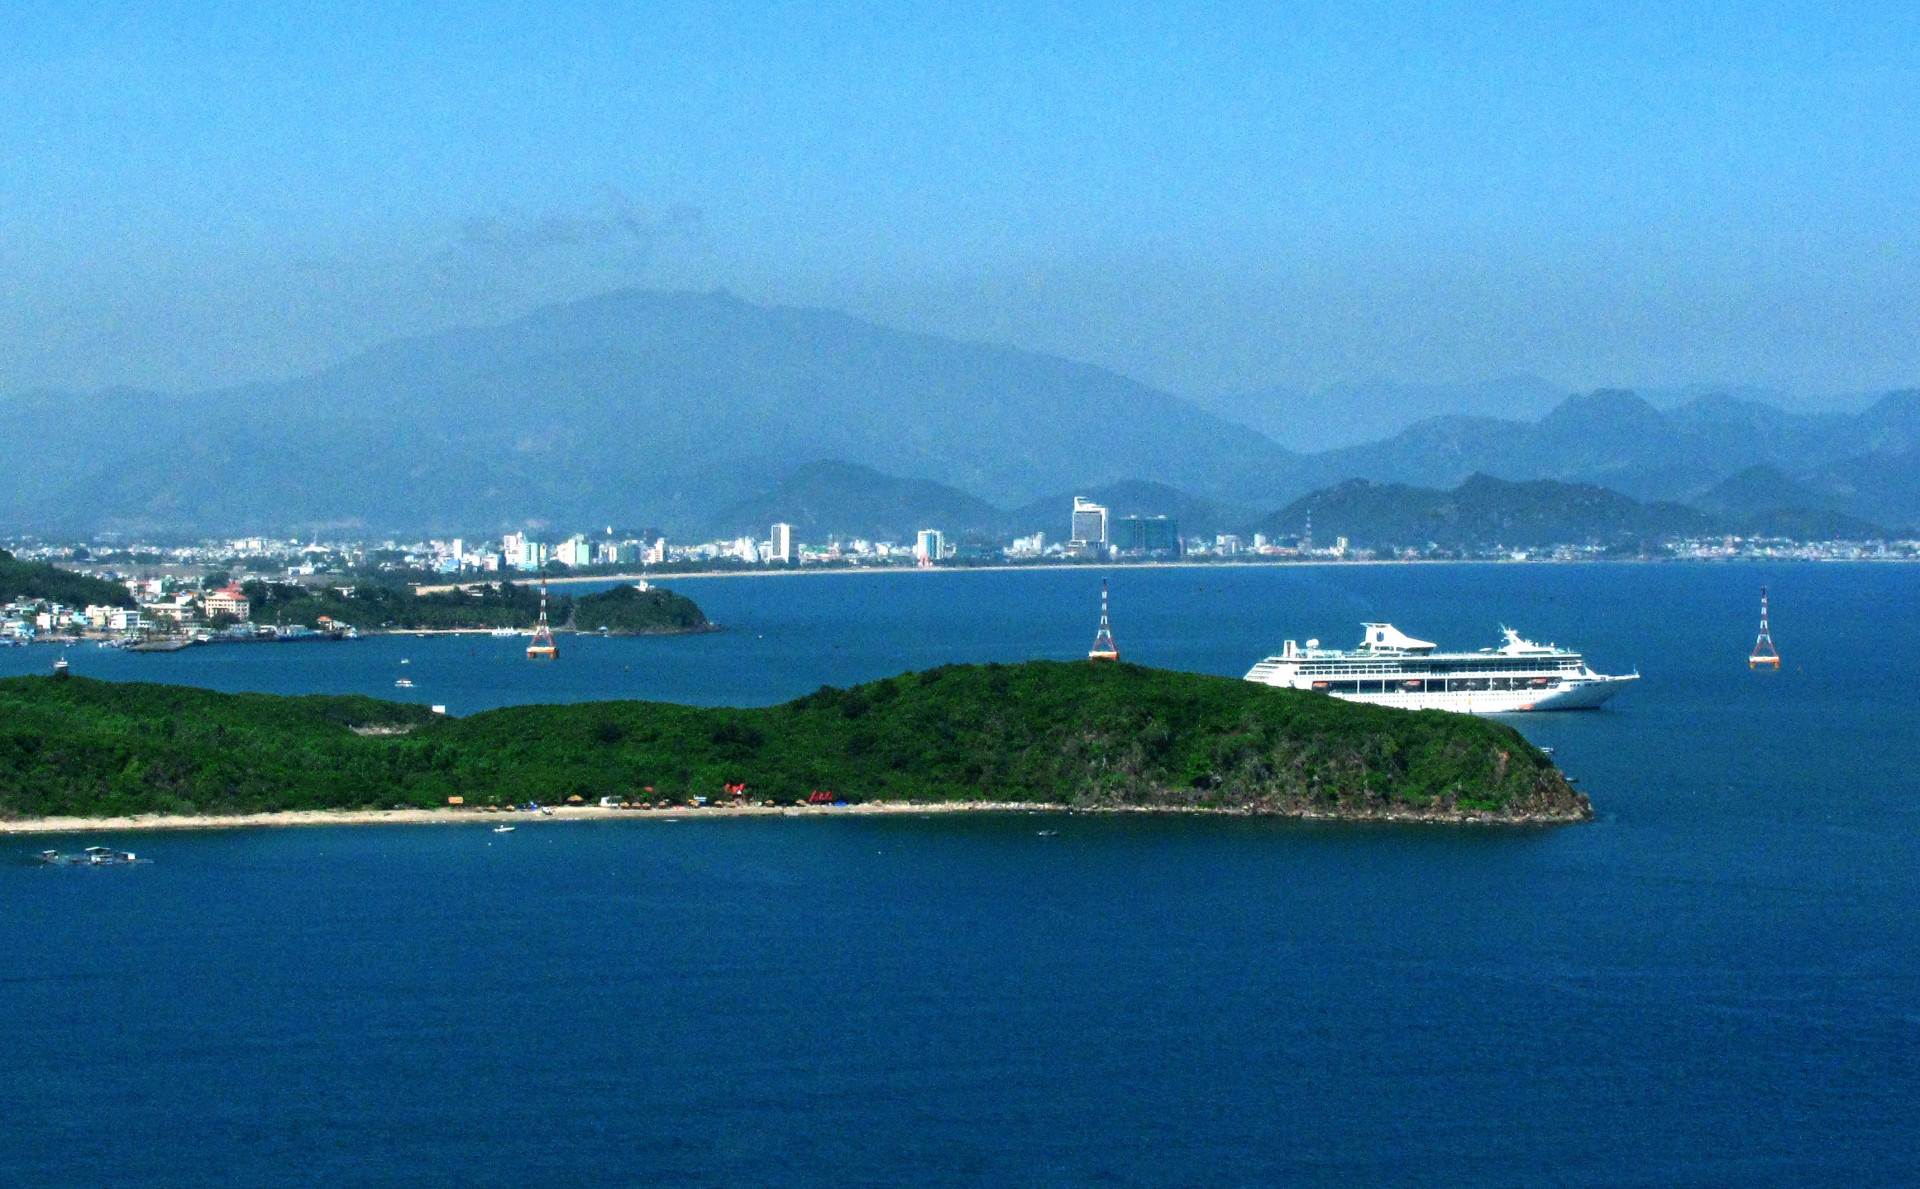 Nha Trang Bay, one of the world’s most spectacular bays, was recognized as national sight in 2005.